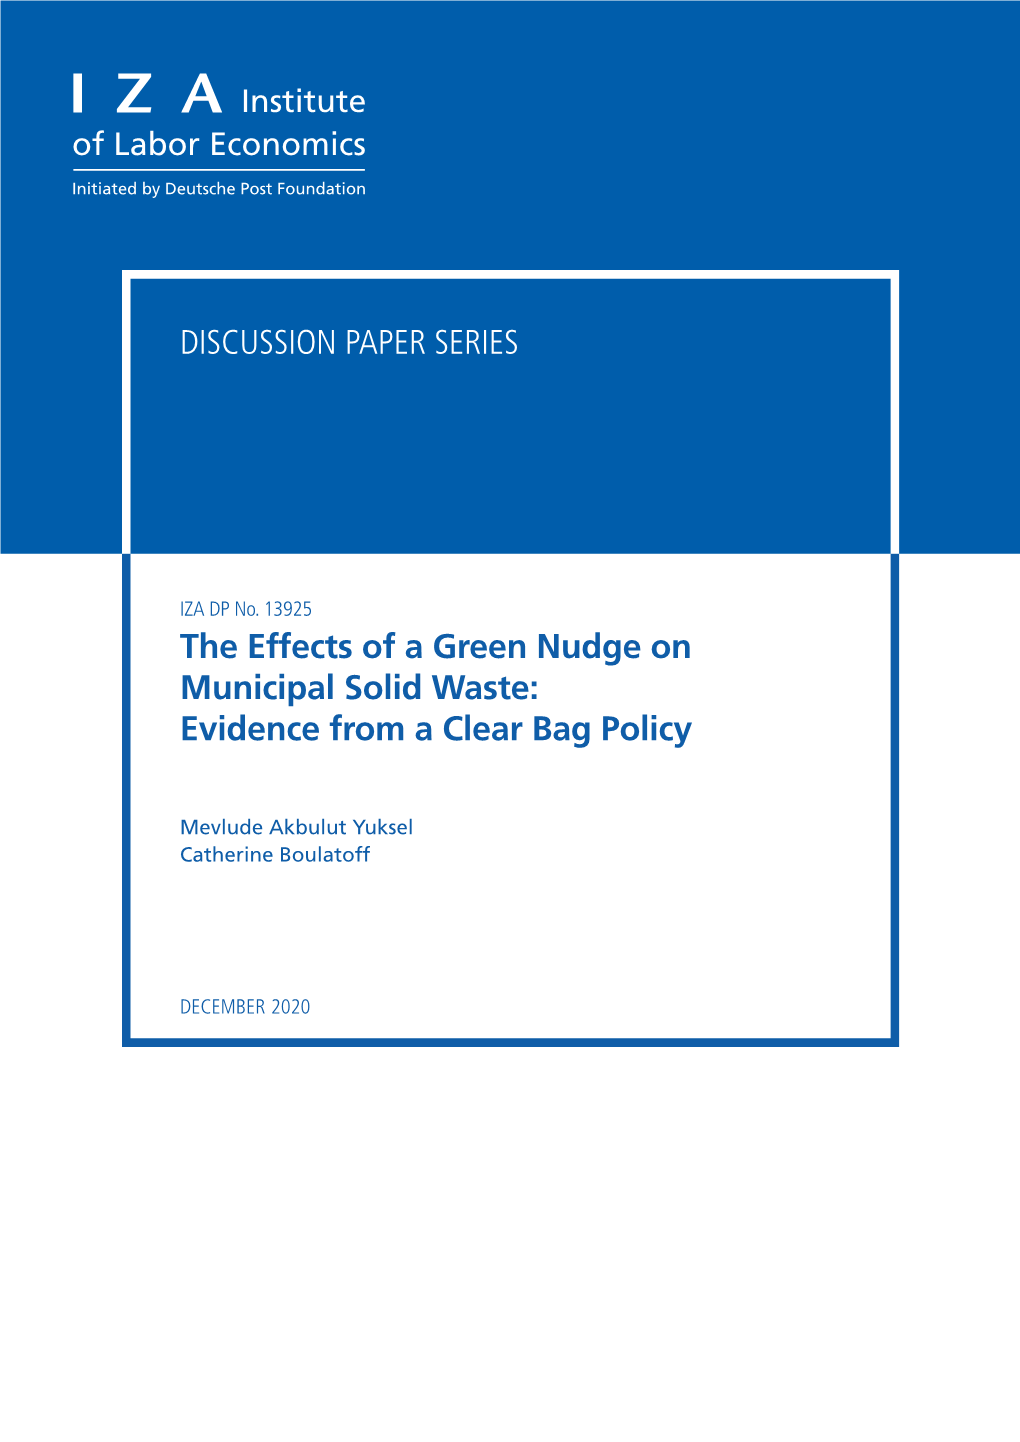 The Effects of a Green Nudge on Municipal Solid Waste: Evidence from a Clear Bag Policy